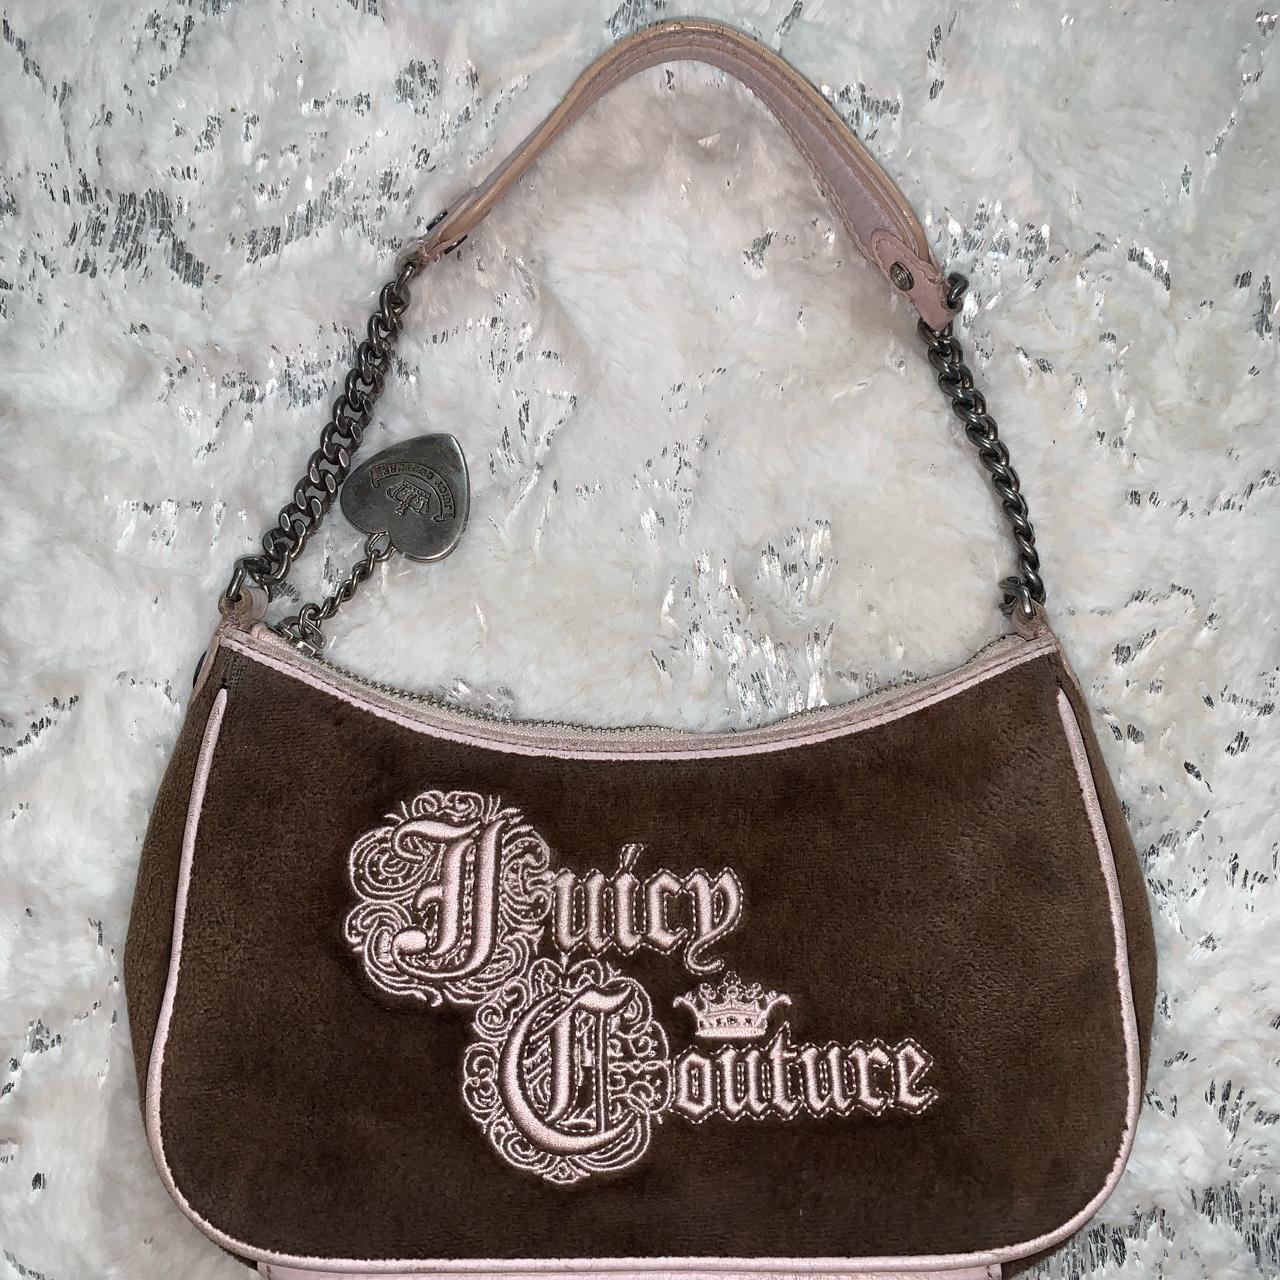 Juicy Couture purse Needs a cleaning - Depop